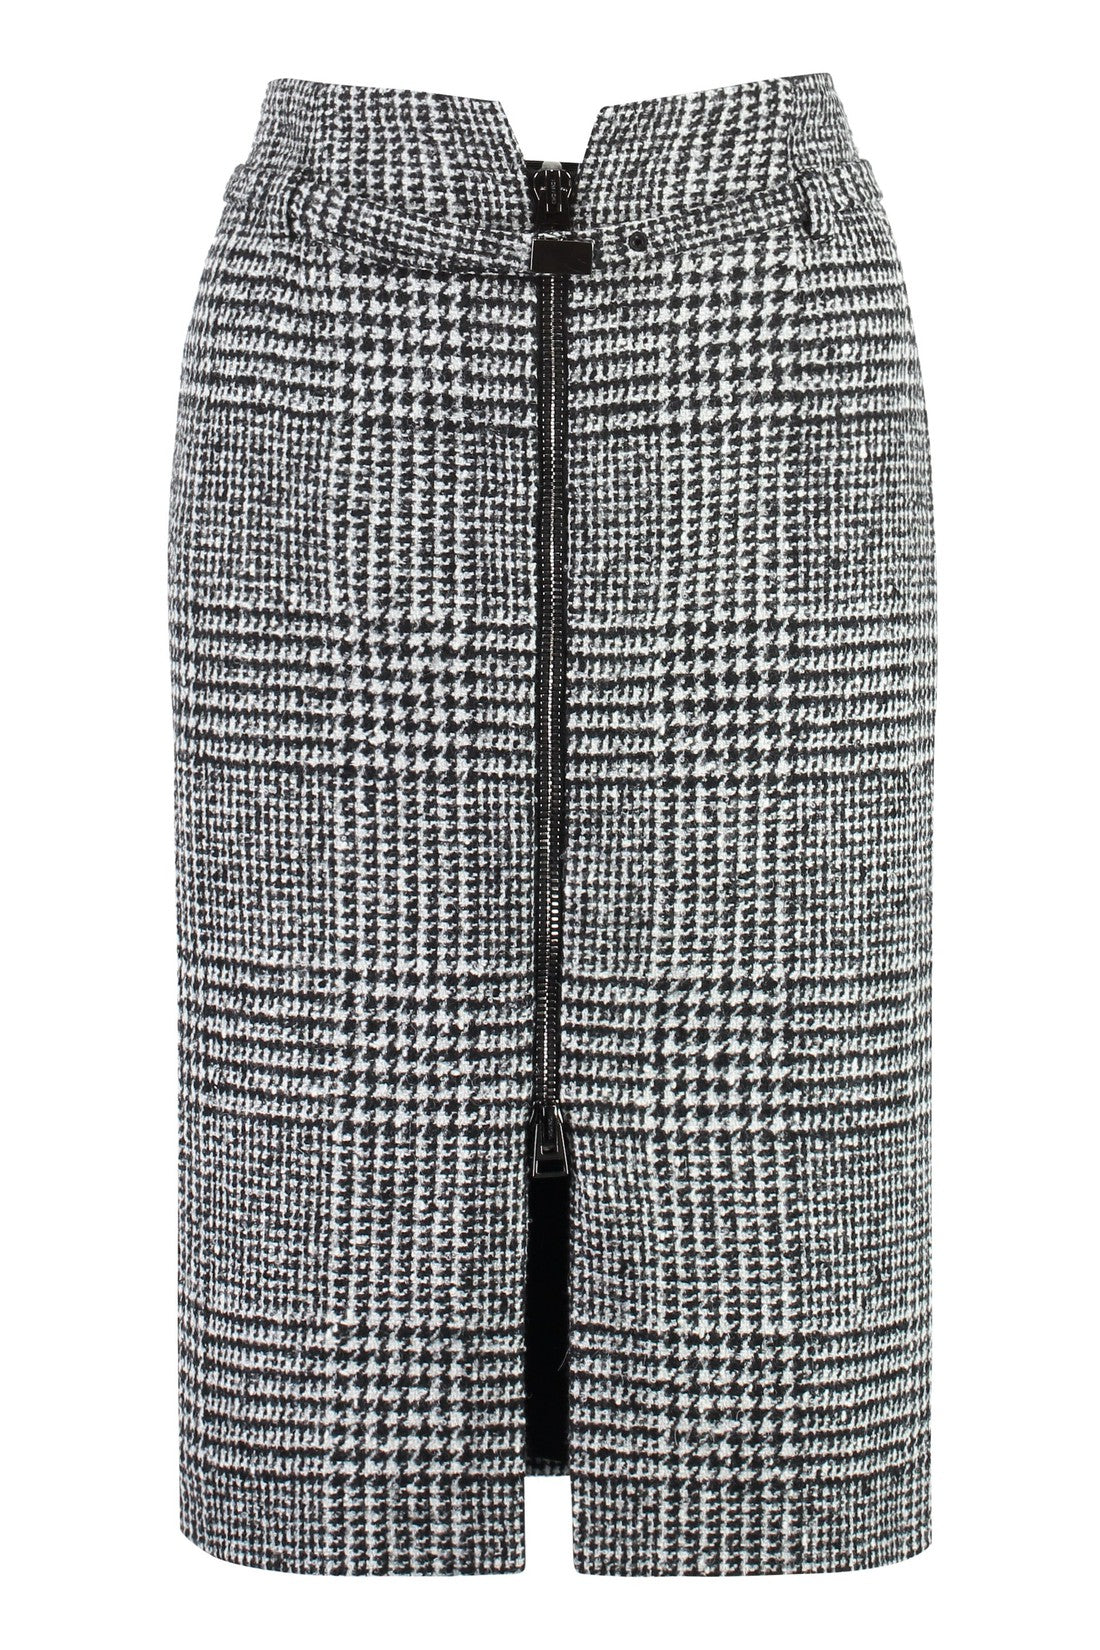 Tom Ford-OUTLET-SALE-Wool skirt-ARCHIVIST